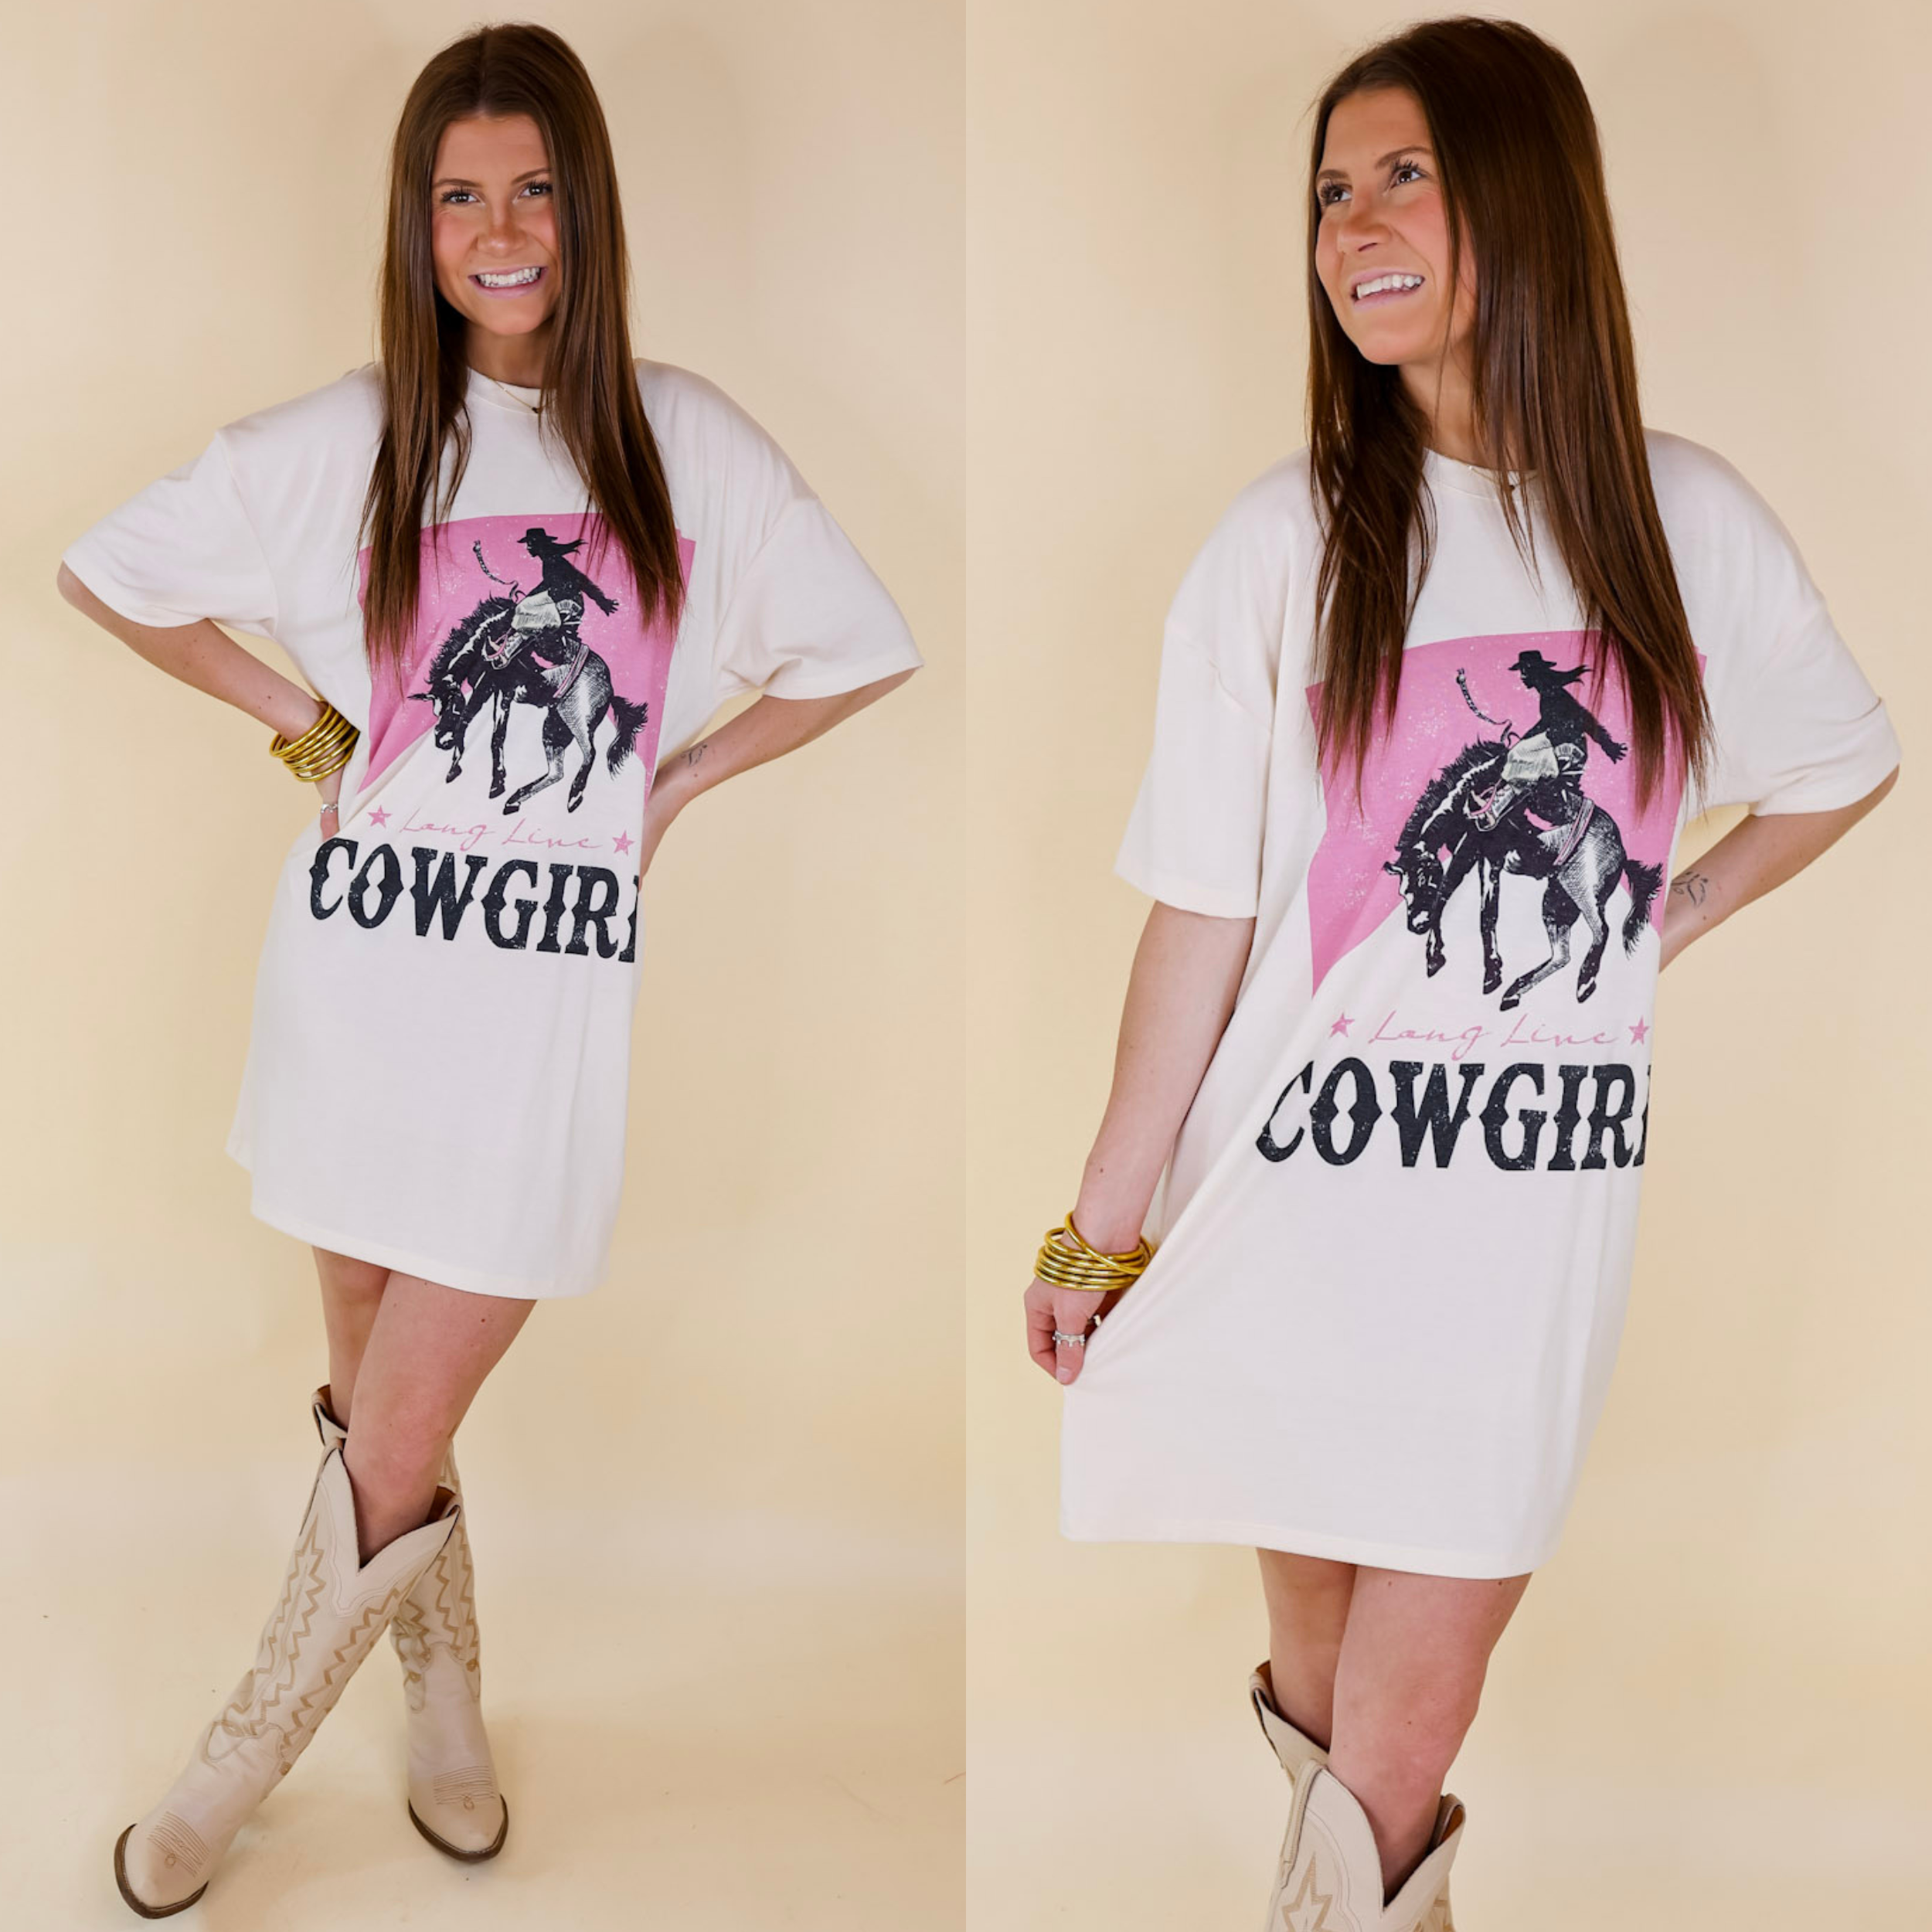 Model is wearing a short sleeve tee shirt dress with a pink graphic that says "Long Live Cowgirl" in black script. Model has this short dress paired with gold jewelry and nude cowboy boots.